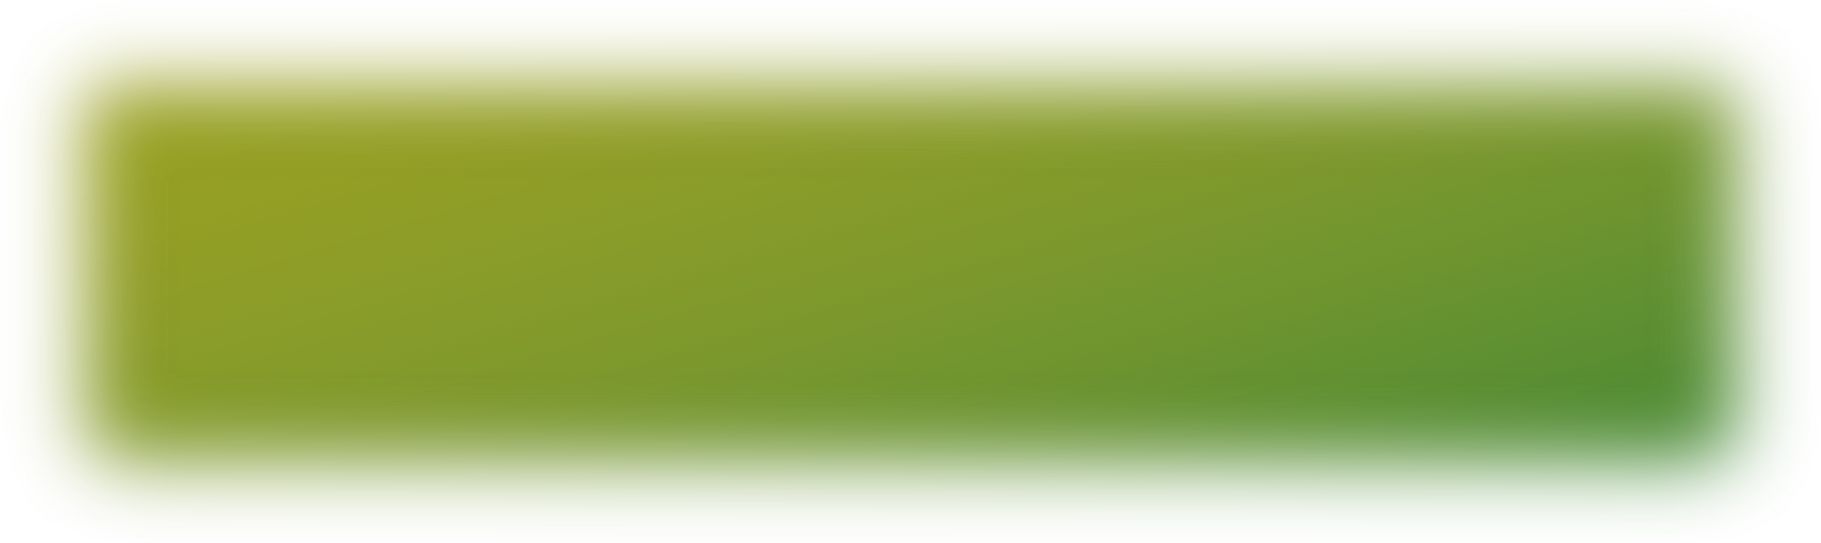 Green Gradient Blurred Rectangle